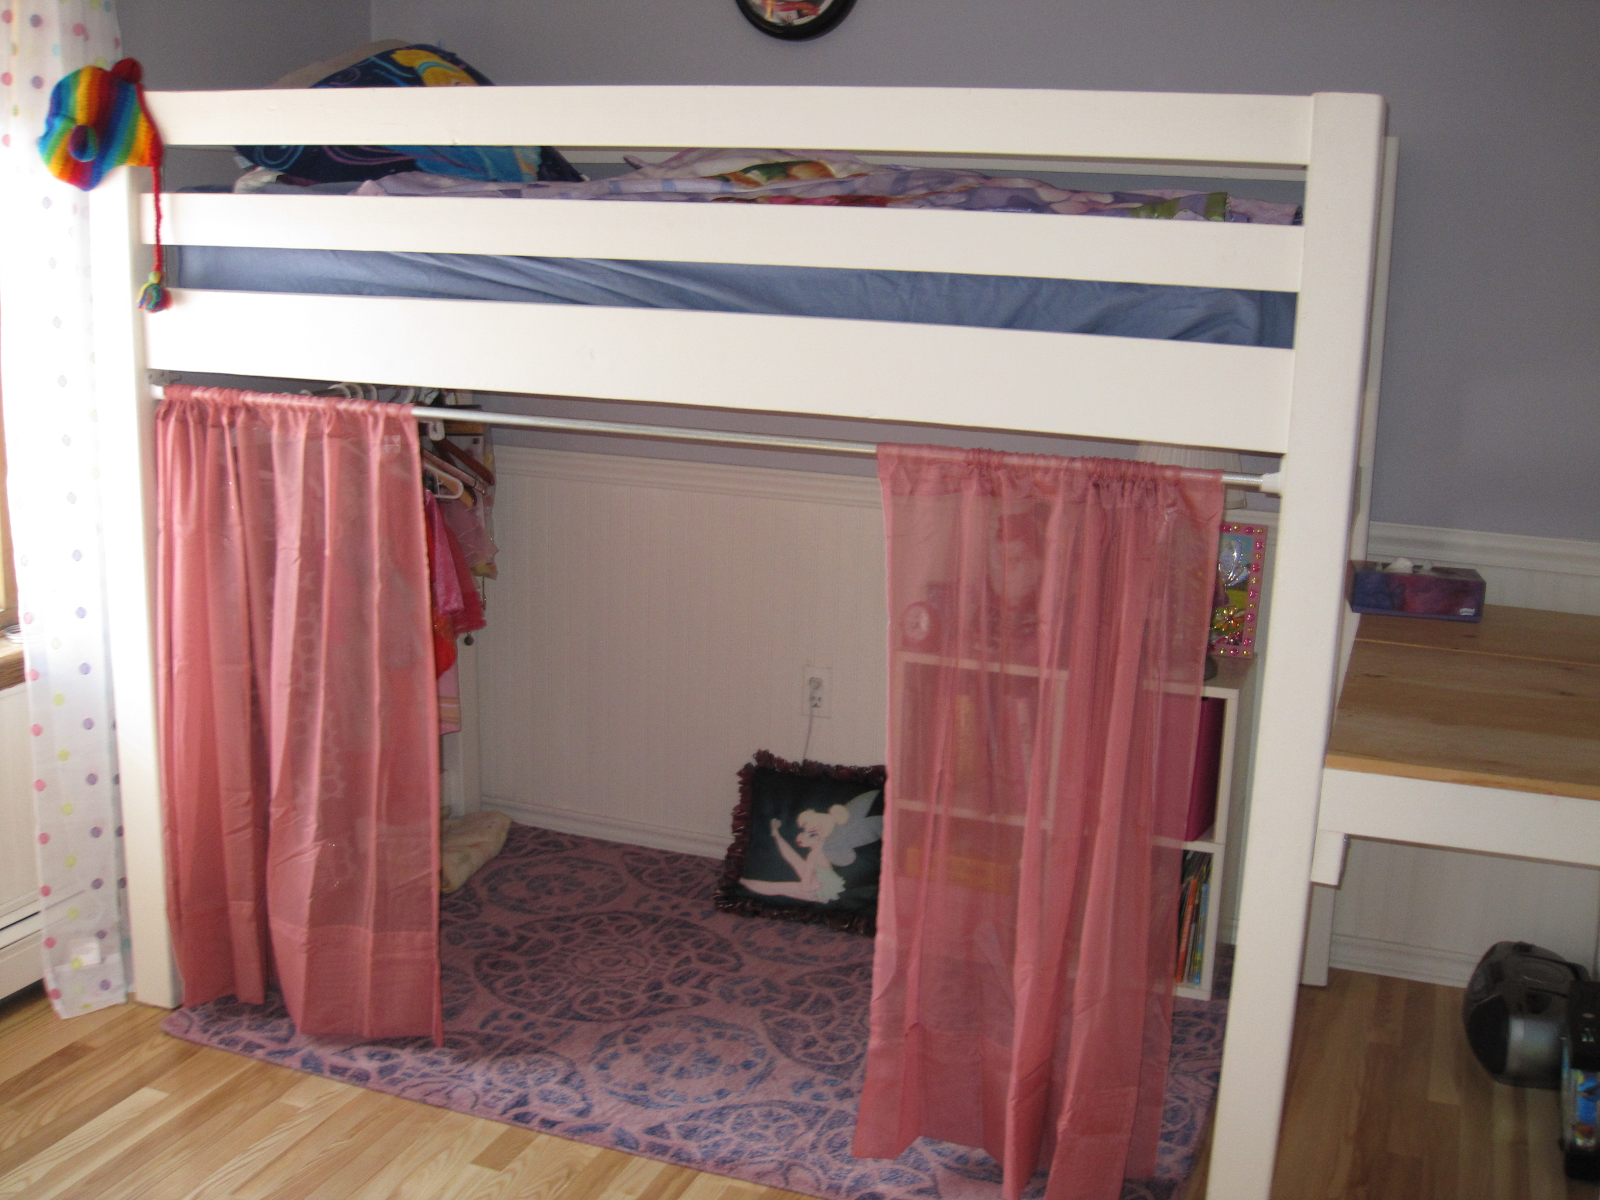 Space Below Your Loft Bed, Under Bunk Bed Curtain